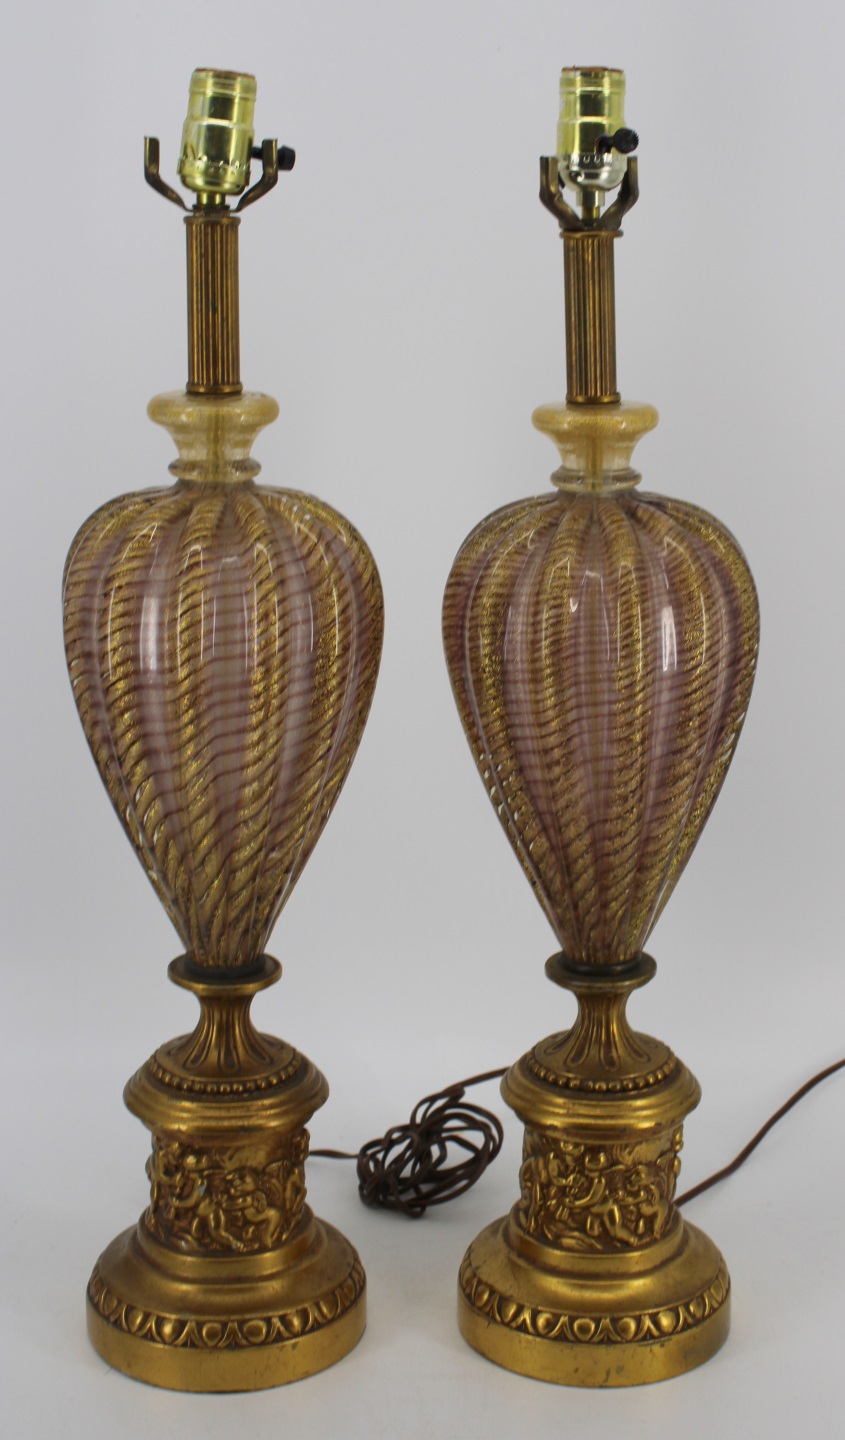 A PAIR OF MURANO GLASS LAMPS ON